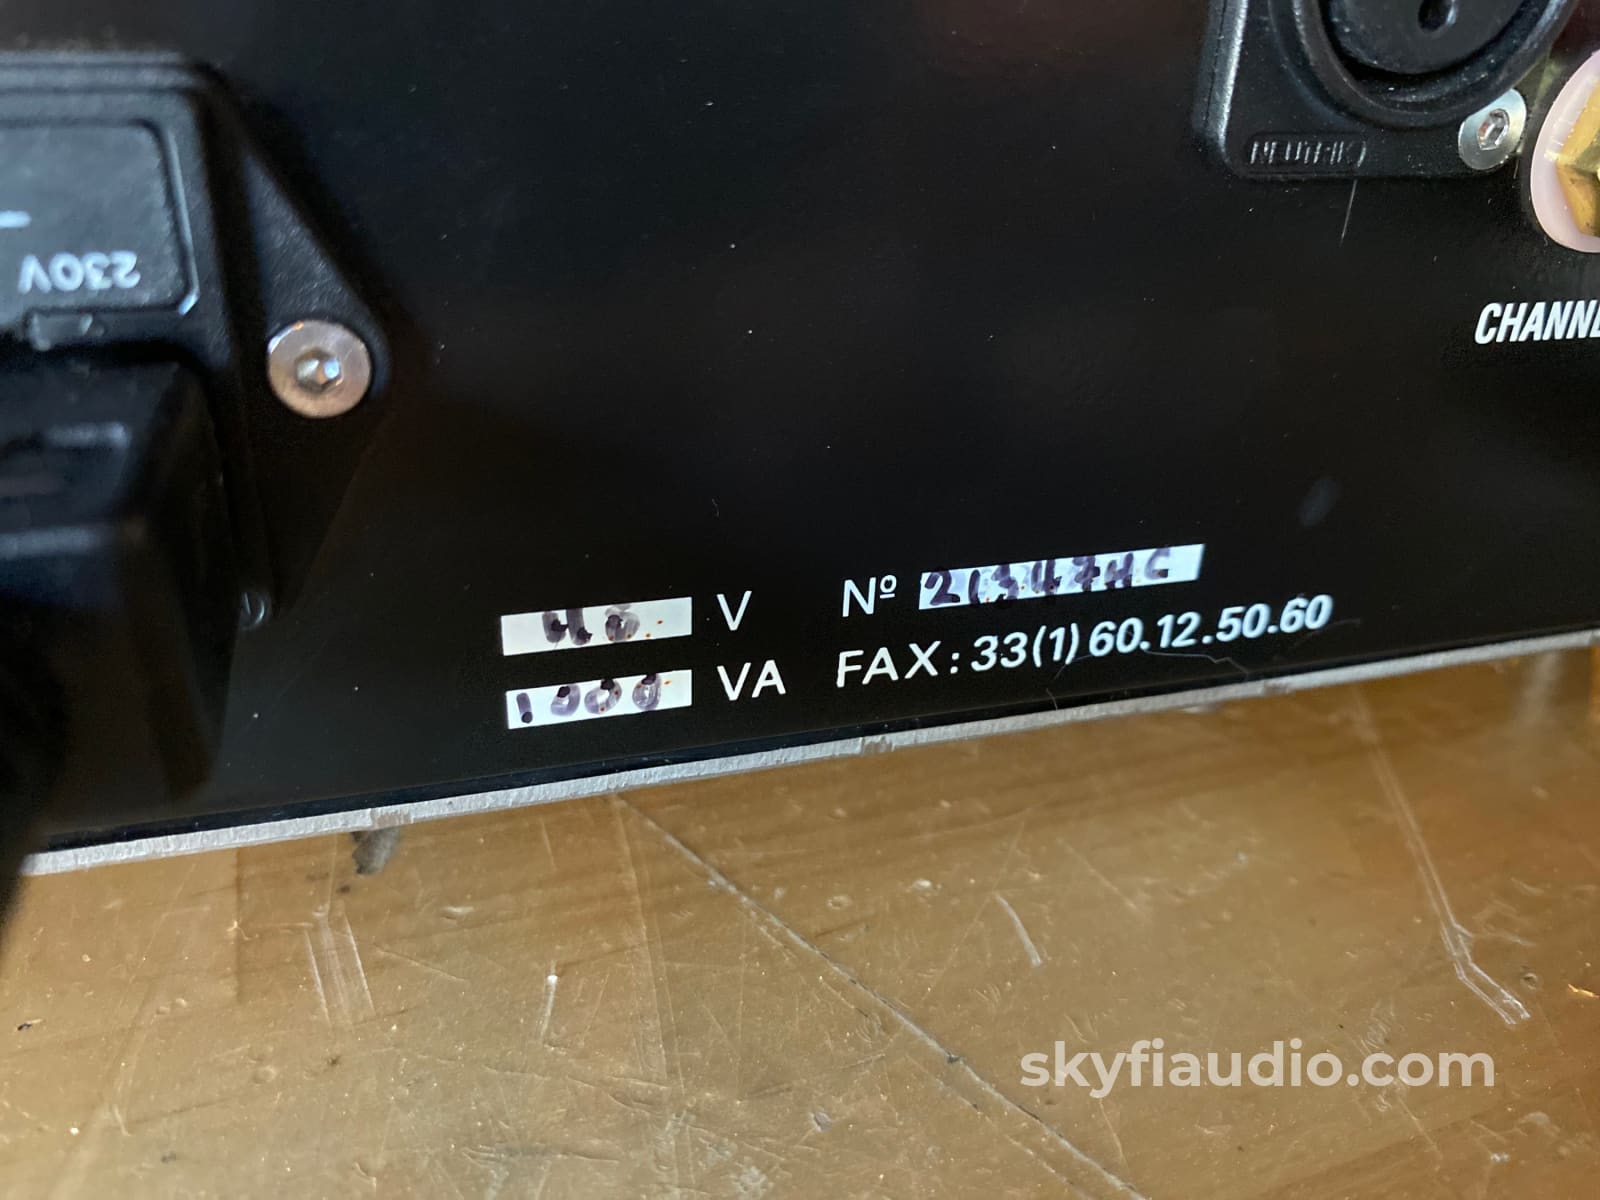 Yba 2 Amplifier Made In France - Stereophile Recommended